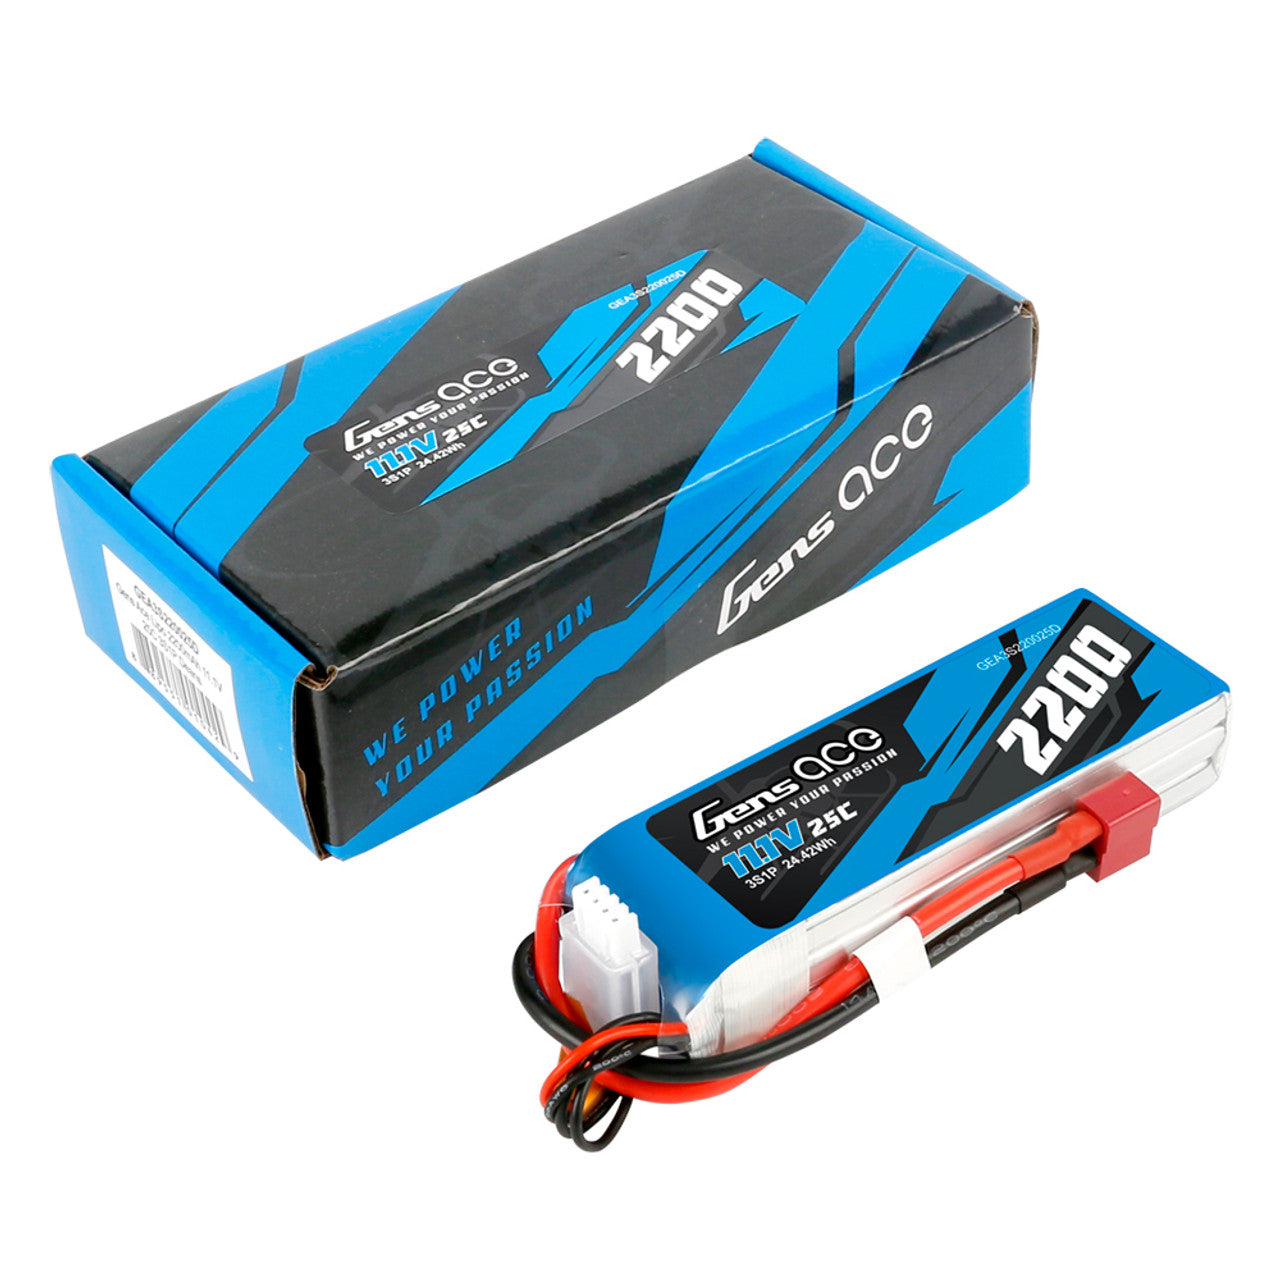 Gens ace 2200mAh 3S 11.1V 25C Lipo Battery Pack with Deans plug